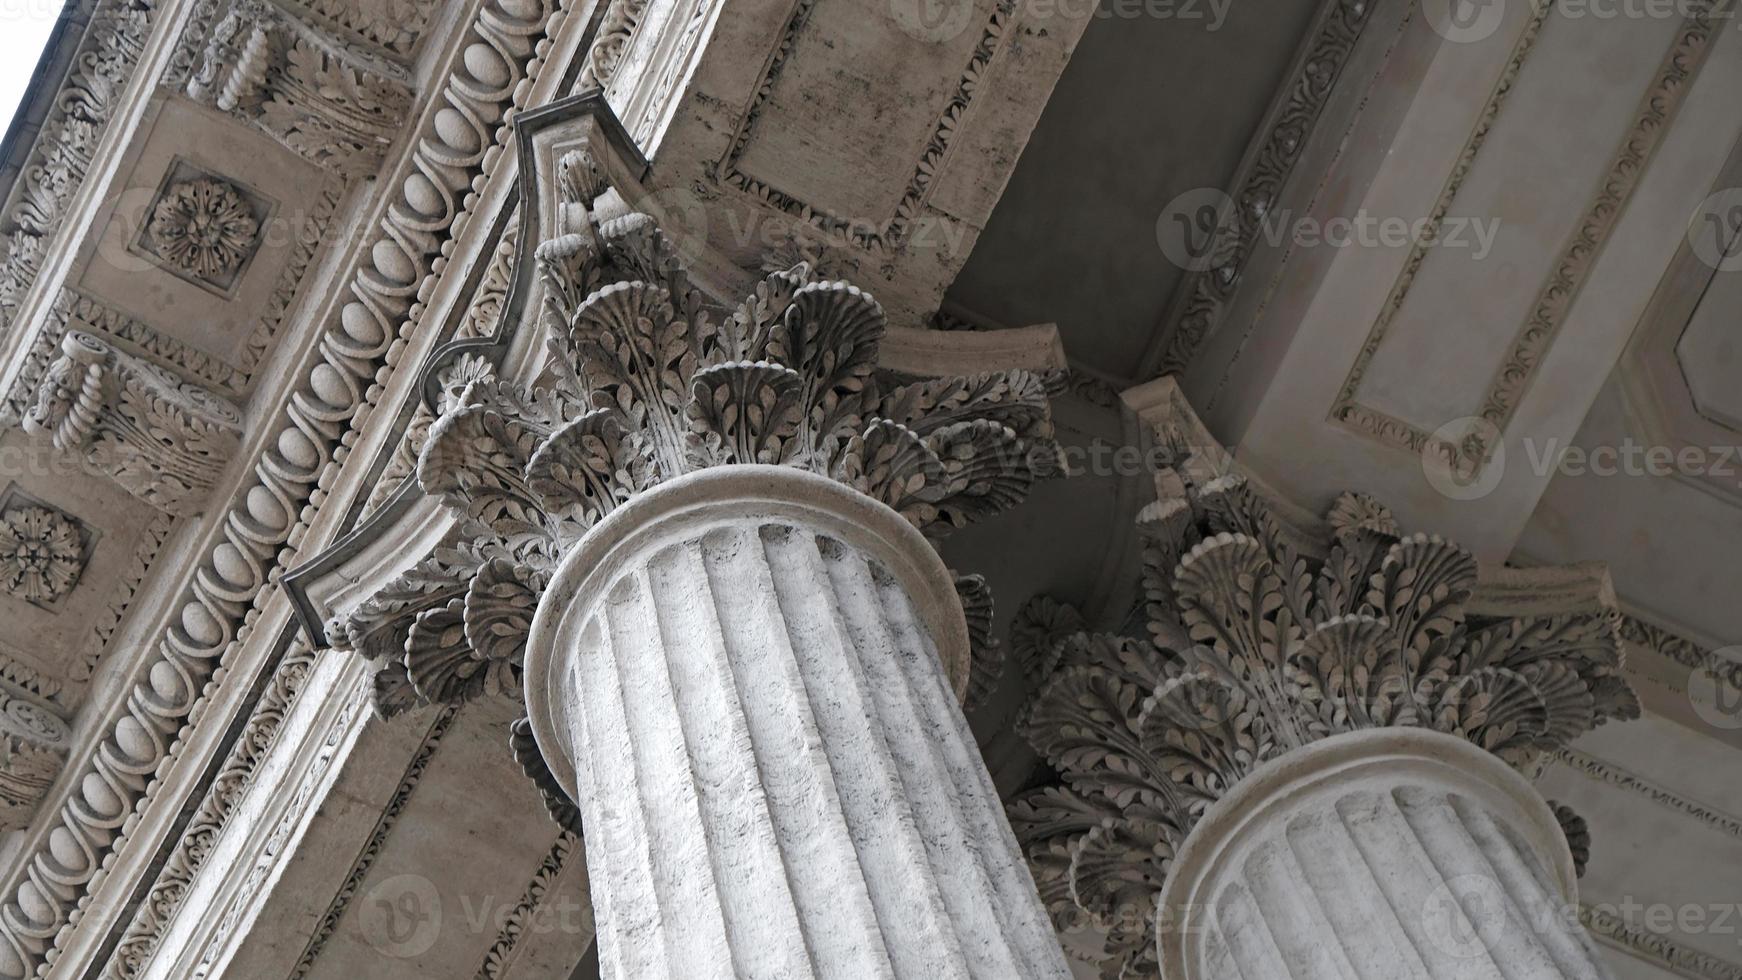 Classic architectural column. Details of the architecture of a historical building. Element of exterior building with columns and Stucco molding on the ceiling of Cathedral in St. Petersburg, Russia. photo